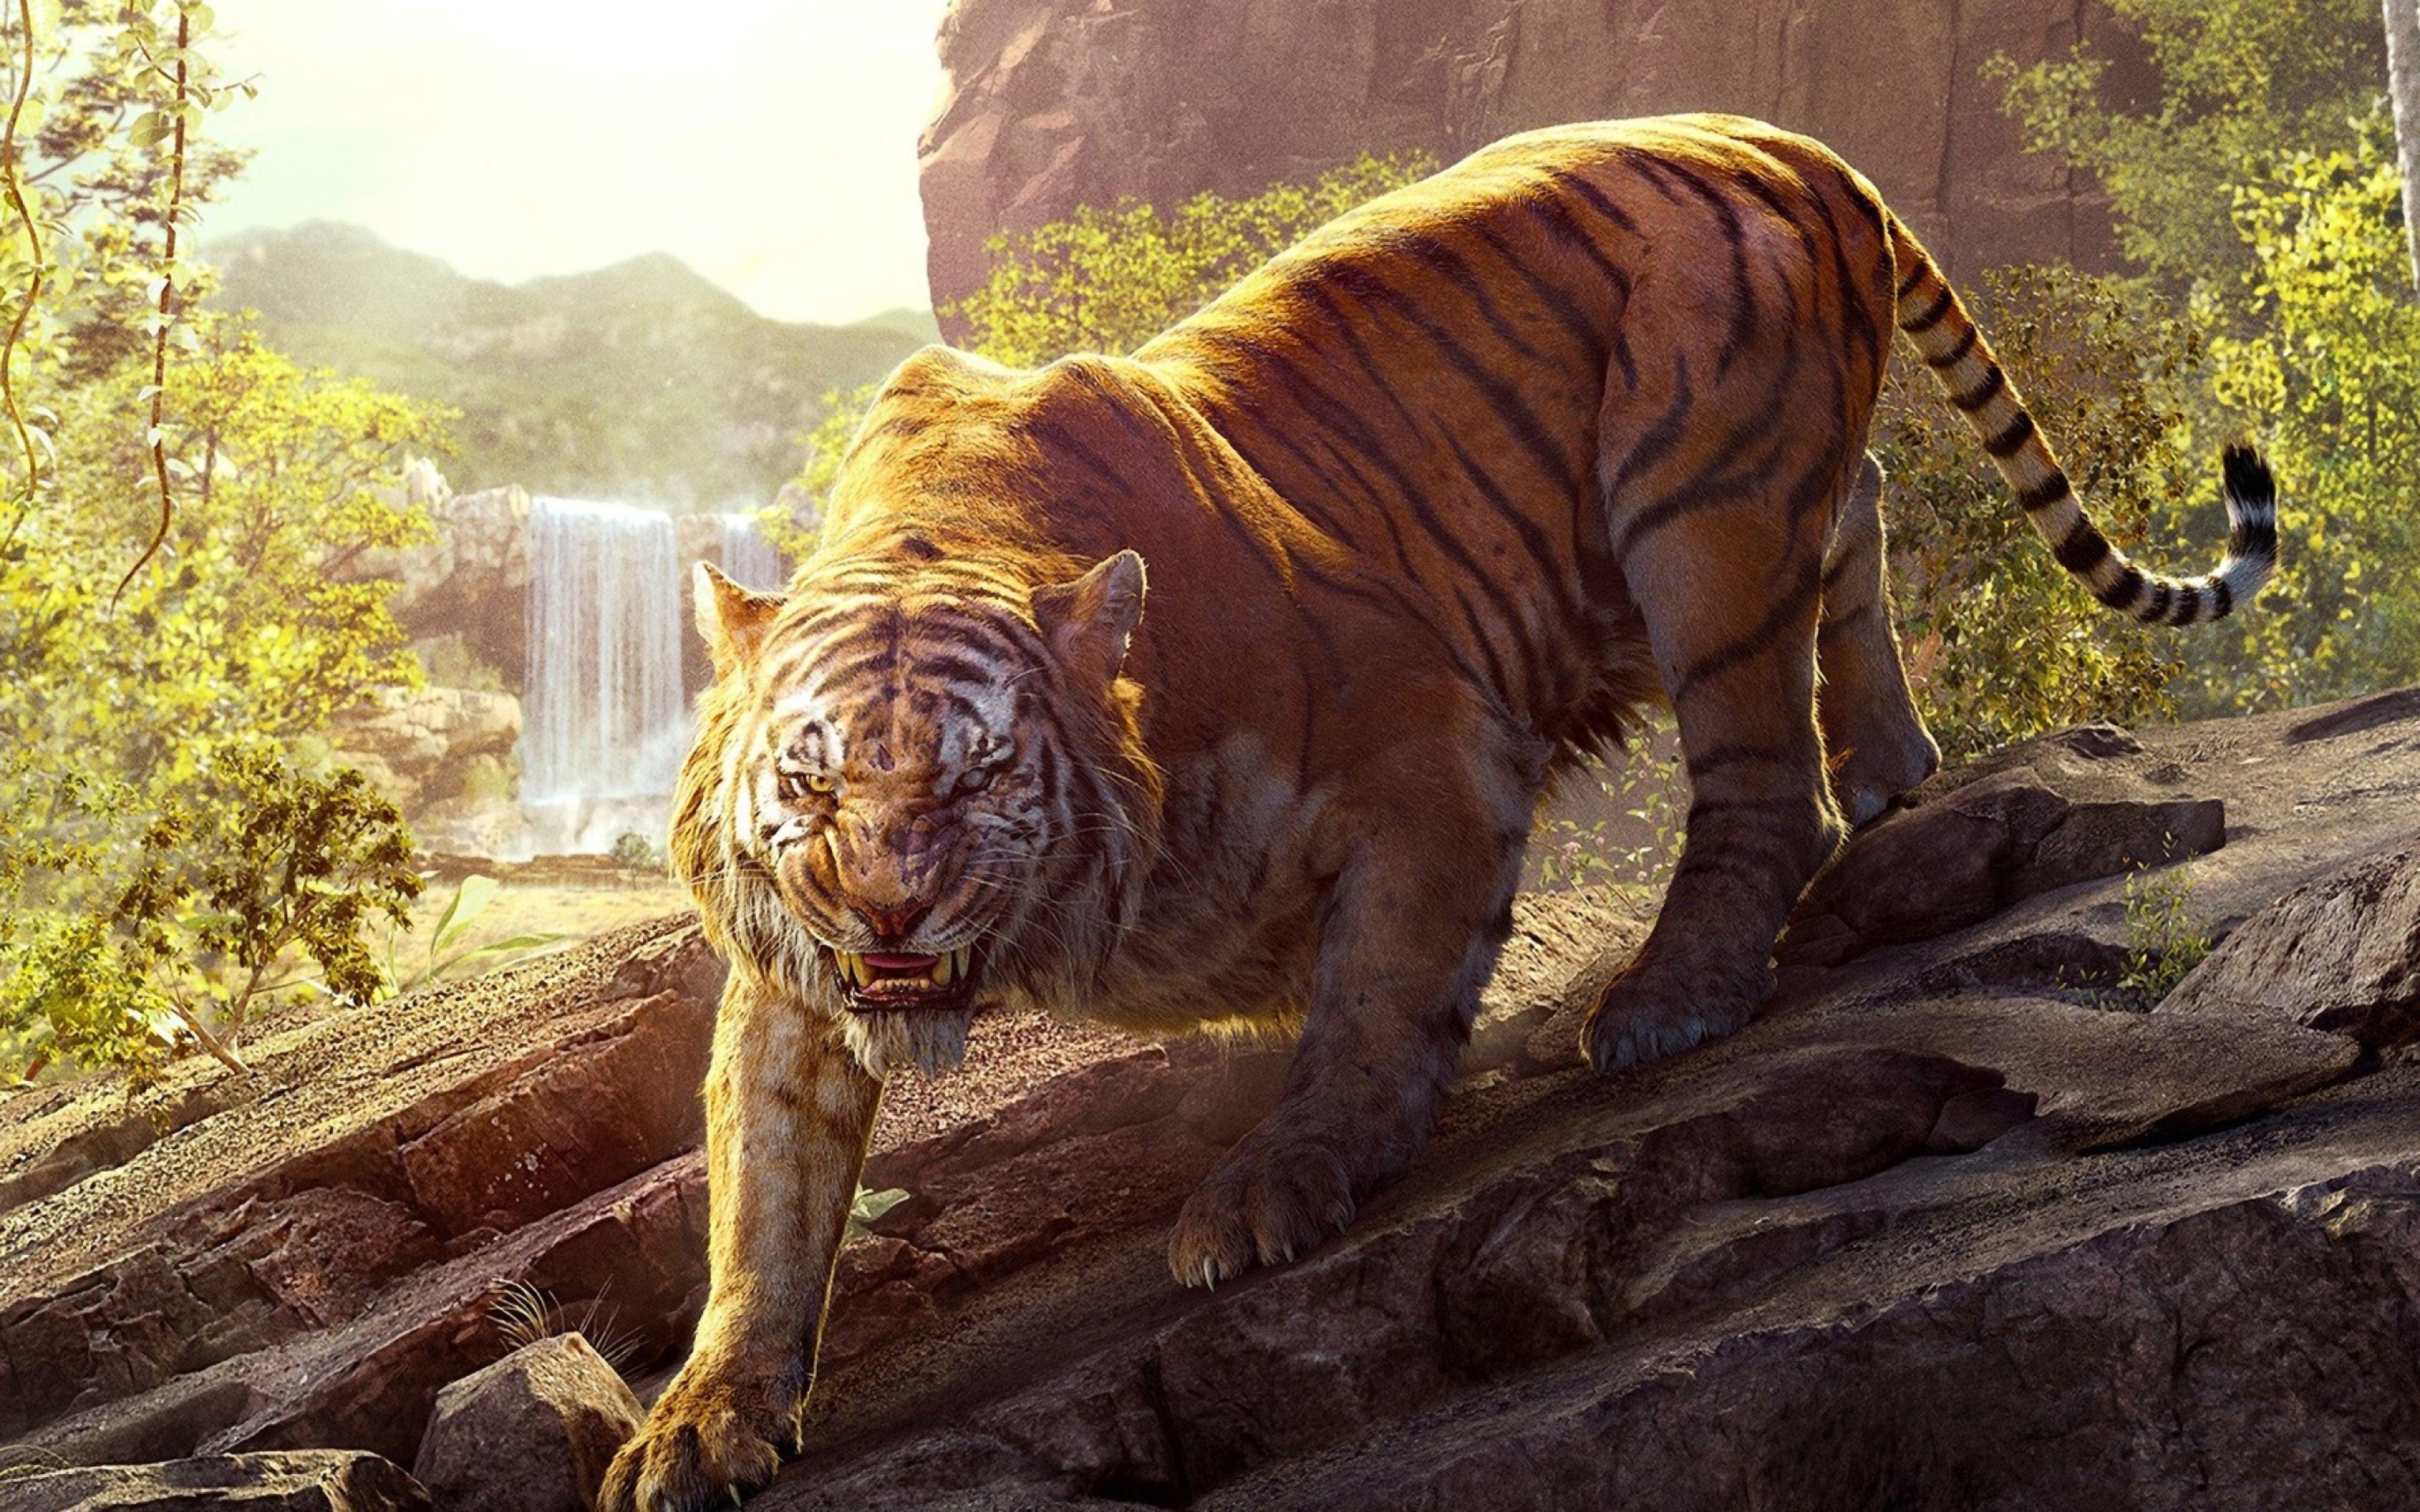 Tiger 4k Wallpapers - Top Free Tiger 4k Backgrounds - WallpaperAccess